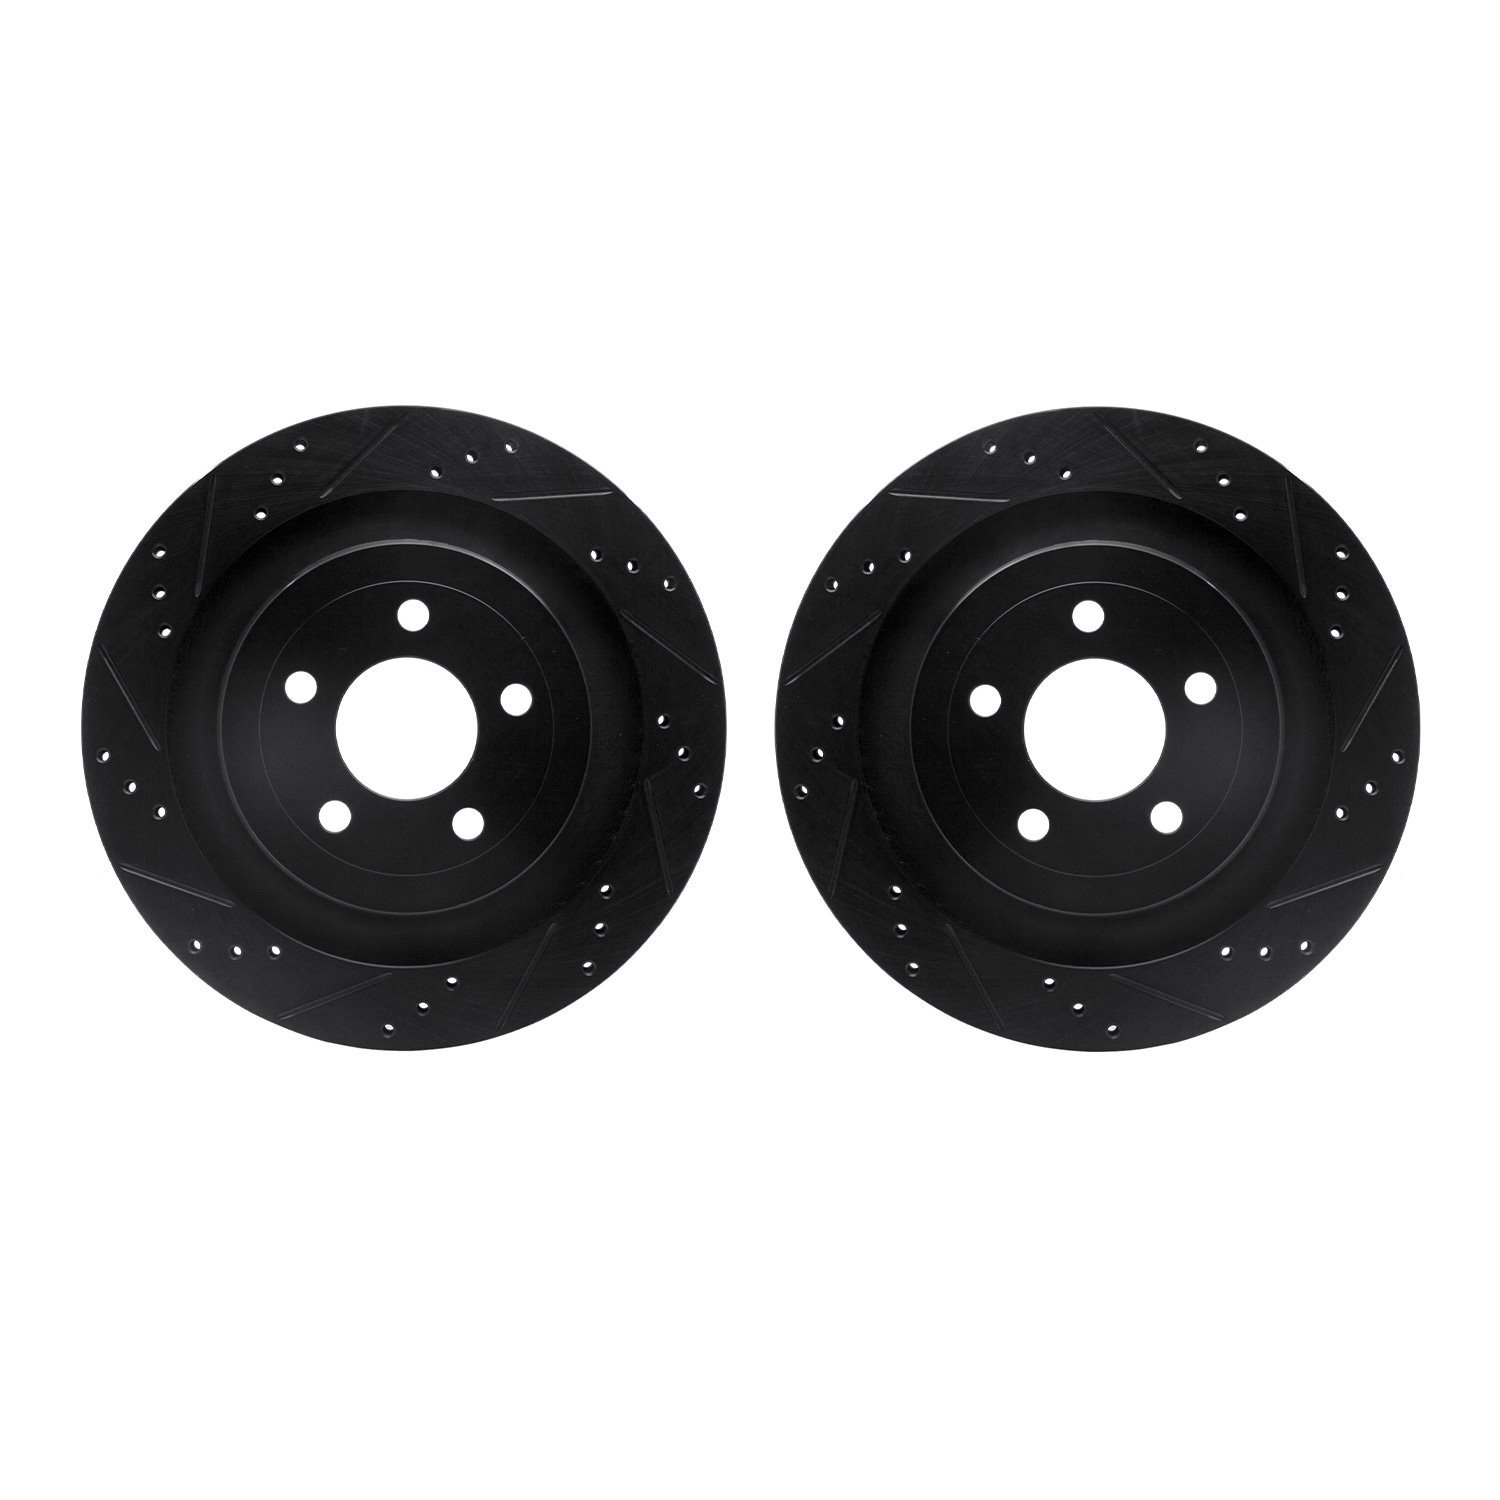 8002-54243 Drilled/Slotted Brake Rotors [Black], Fits Select Ford/Lincoln/Mercury/Mazda, Position: Rear